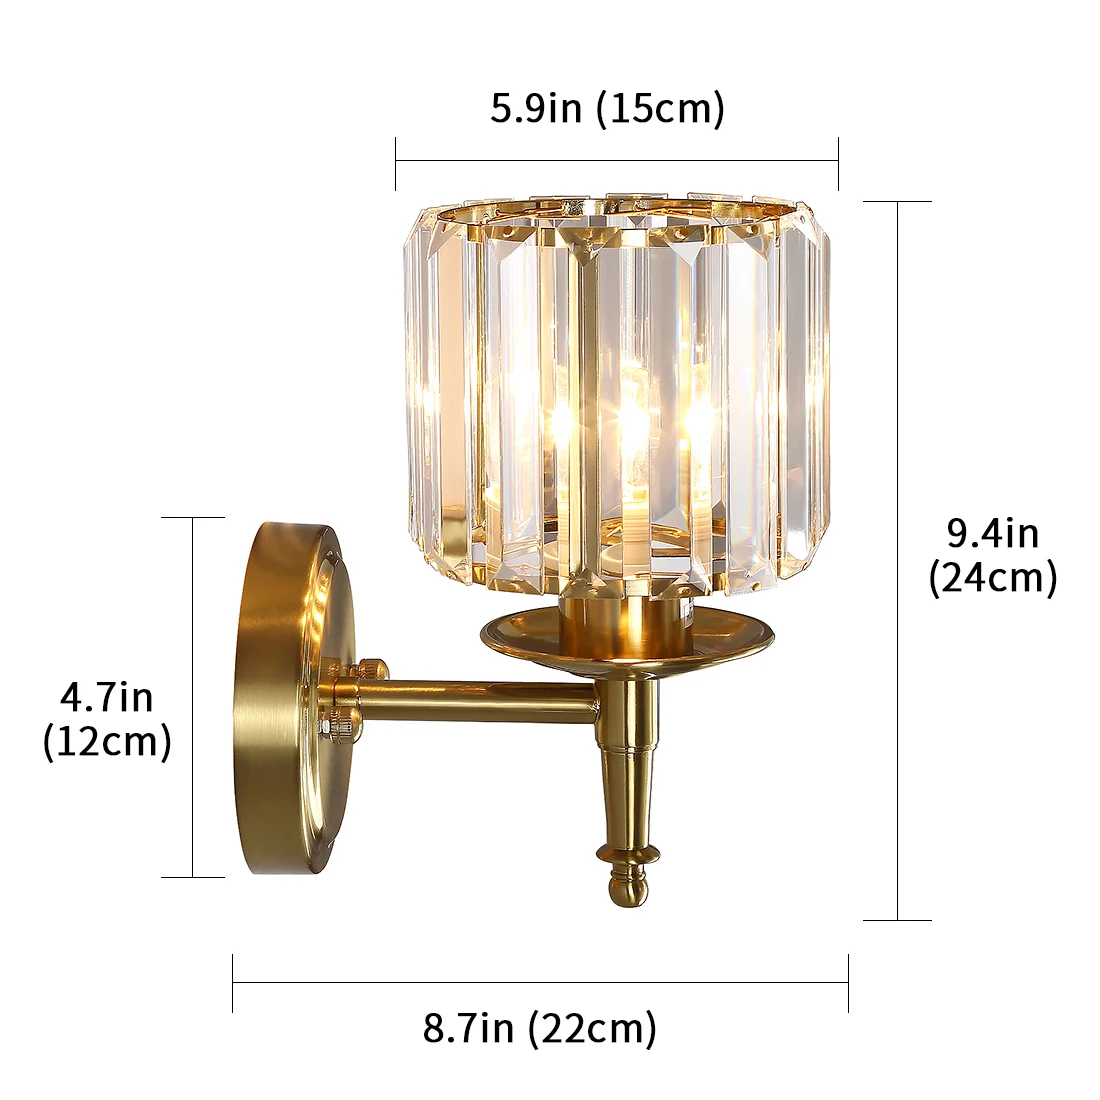 Europe Crystal Wall Lamp Bedroom Bedside Livingroom Luxury Stair LED Sconce Study Lamps Home Golden Hotel Hall Aisle Wall Light Modern Europe Crystal Wall Lamp Electroplating gold Luxury Stair Wall Light LED Decoration Light For Foyer Bedroom Living Room Dining Hall Aisle Lamp wall hanging lights Wall Lamps